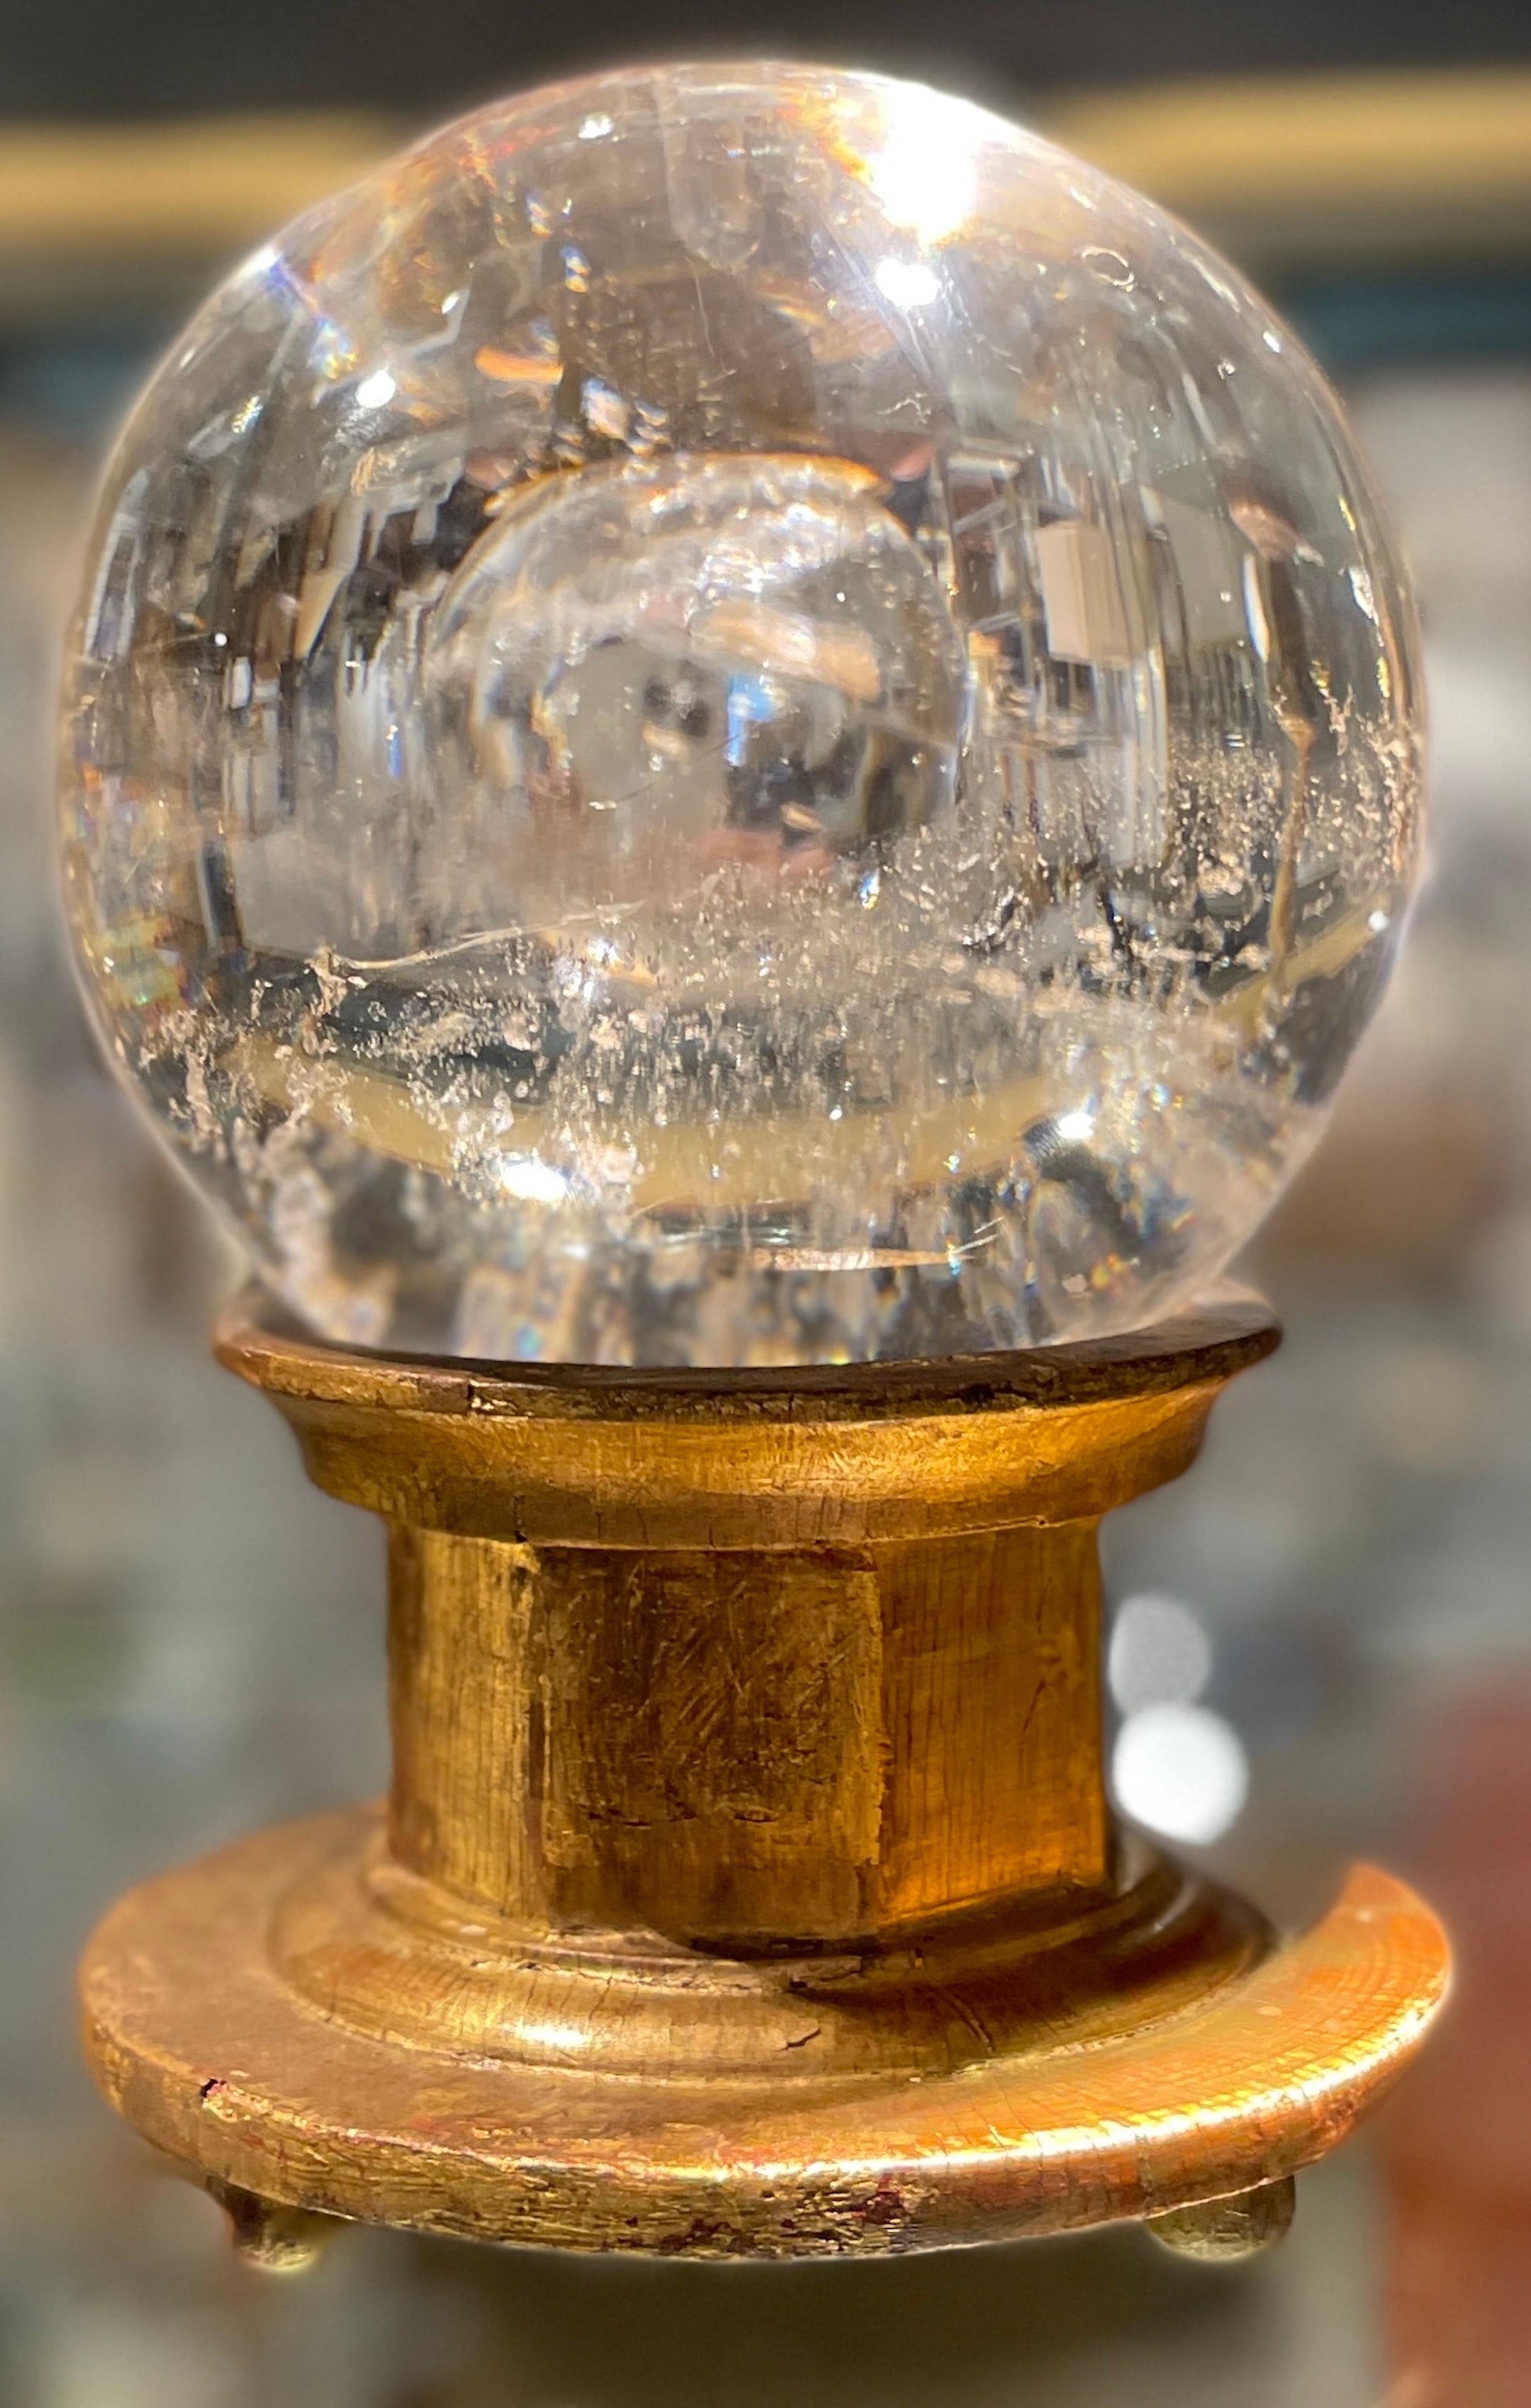 18th-19th C. Italian rock crystal ball/orb on a later Italian giltwood stand, in two parts
The rock crystal ball/ orb European possibly French or Russian
The stand early 20th century carved giltwood and polychromed pedestal base.

A magnificent